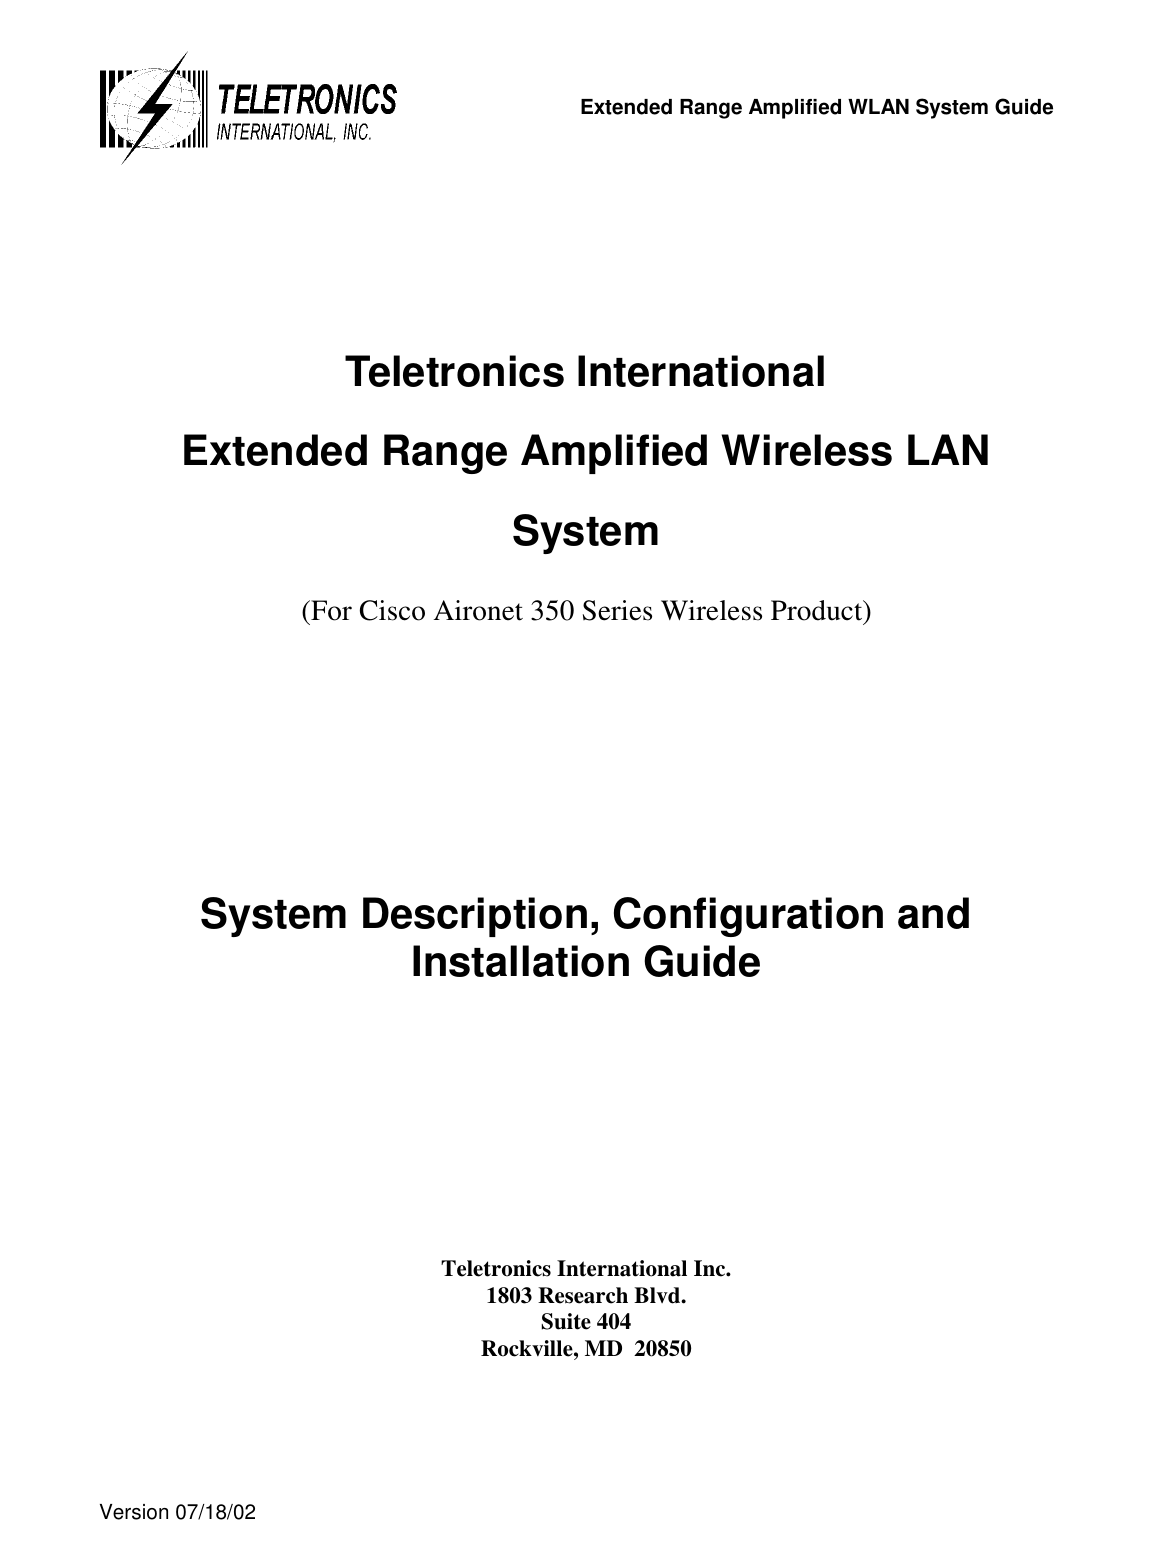   Extended Range Amplified WLAN System Guide  Version 07/18/02          Teletronics International  Extended Range Amplified Wireless LAN System  (For Cisco Aironet 350 Series Wireless Product)    System Description, Configuration and Installation Guide         Teletronics International Inc. 1803 Research Blvd. Suite 404 Rockville, MD  20850    